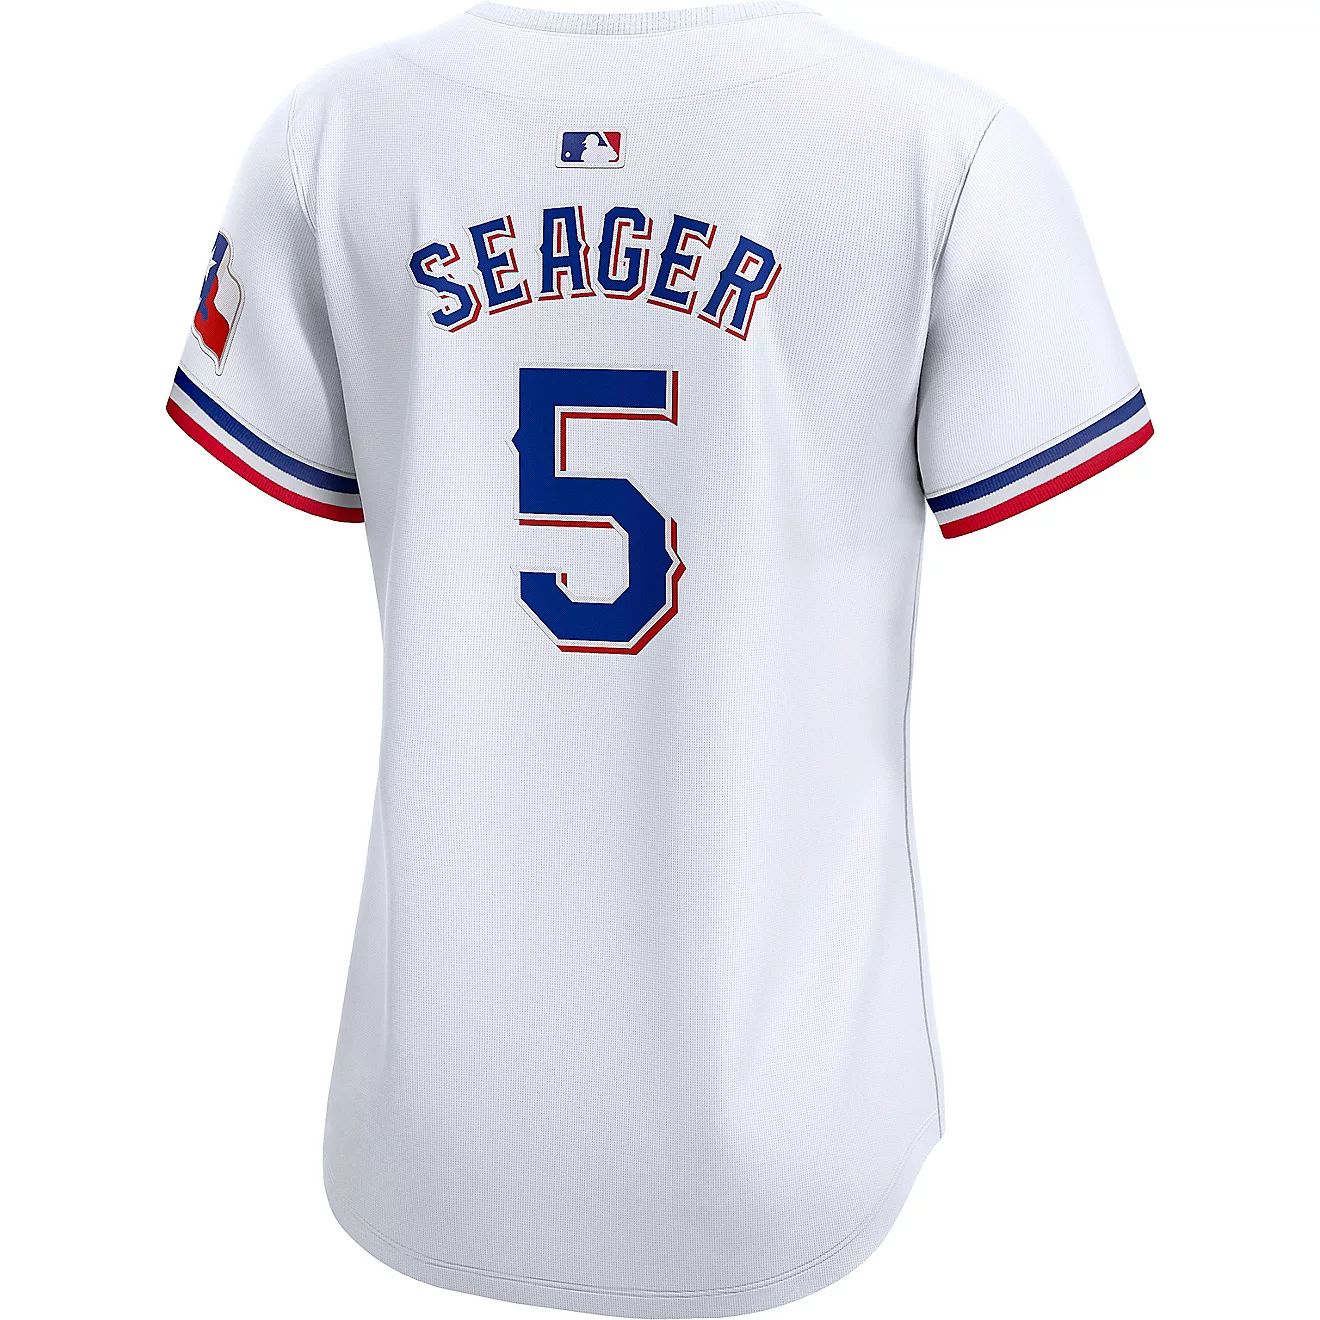 Nike Women’s Texas Rangers Seager Home Limited Jersey | Academy | Academy Sports + Outdoors